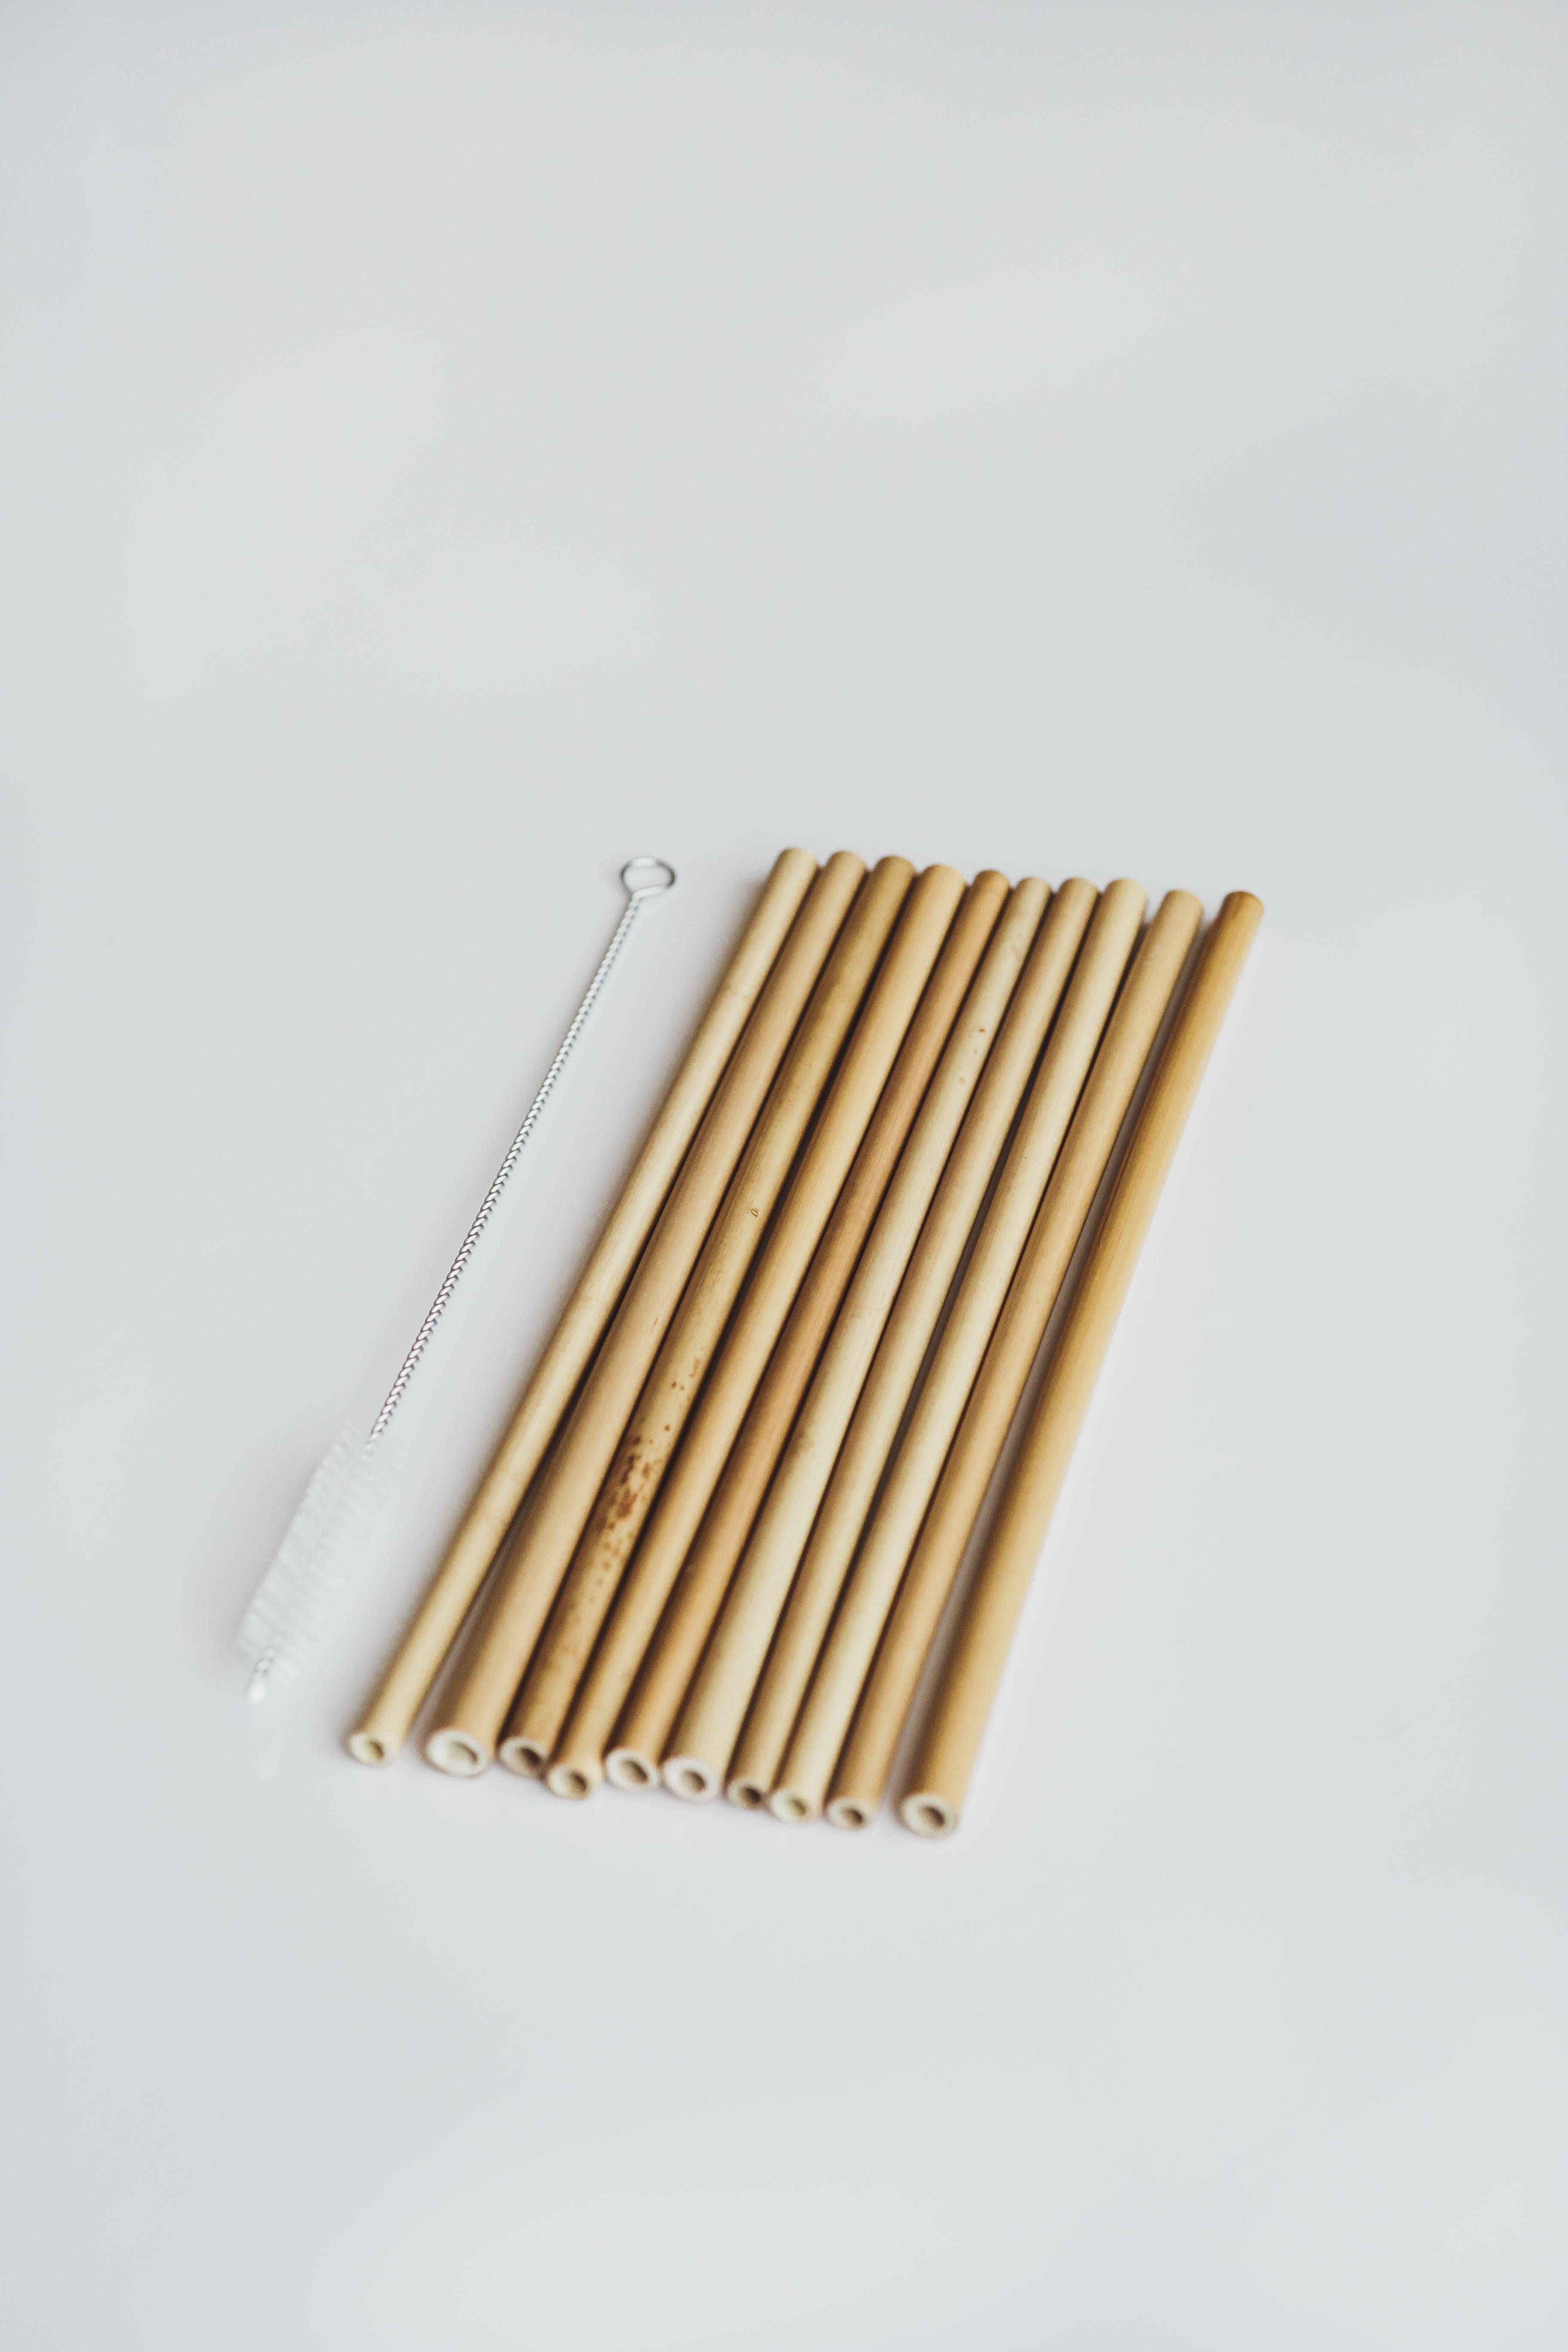 Zero Waste MVMT | The Best Reusable Bamboo Drinking Straws With Cleaning Brush - 10 Pack, Straw, Zero Waste MVMT, Defiance Outdoor Gear Co.